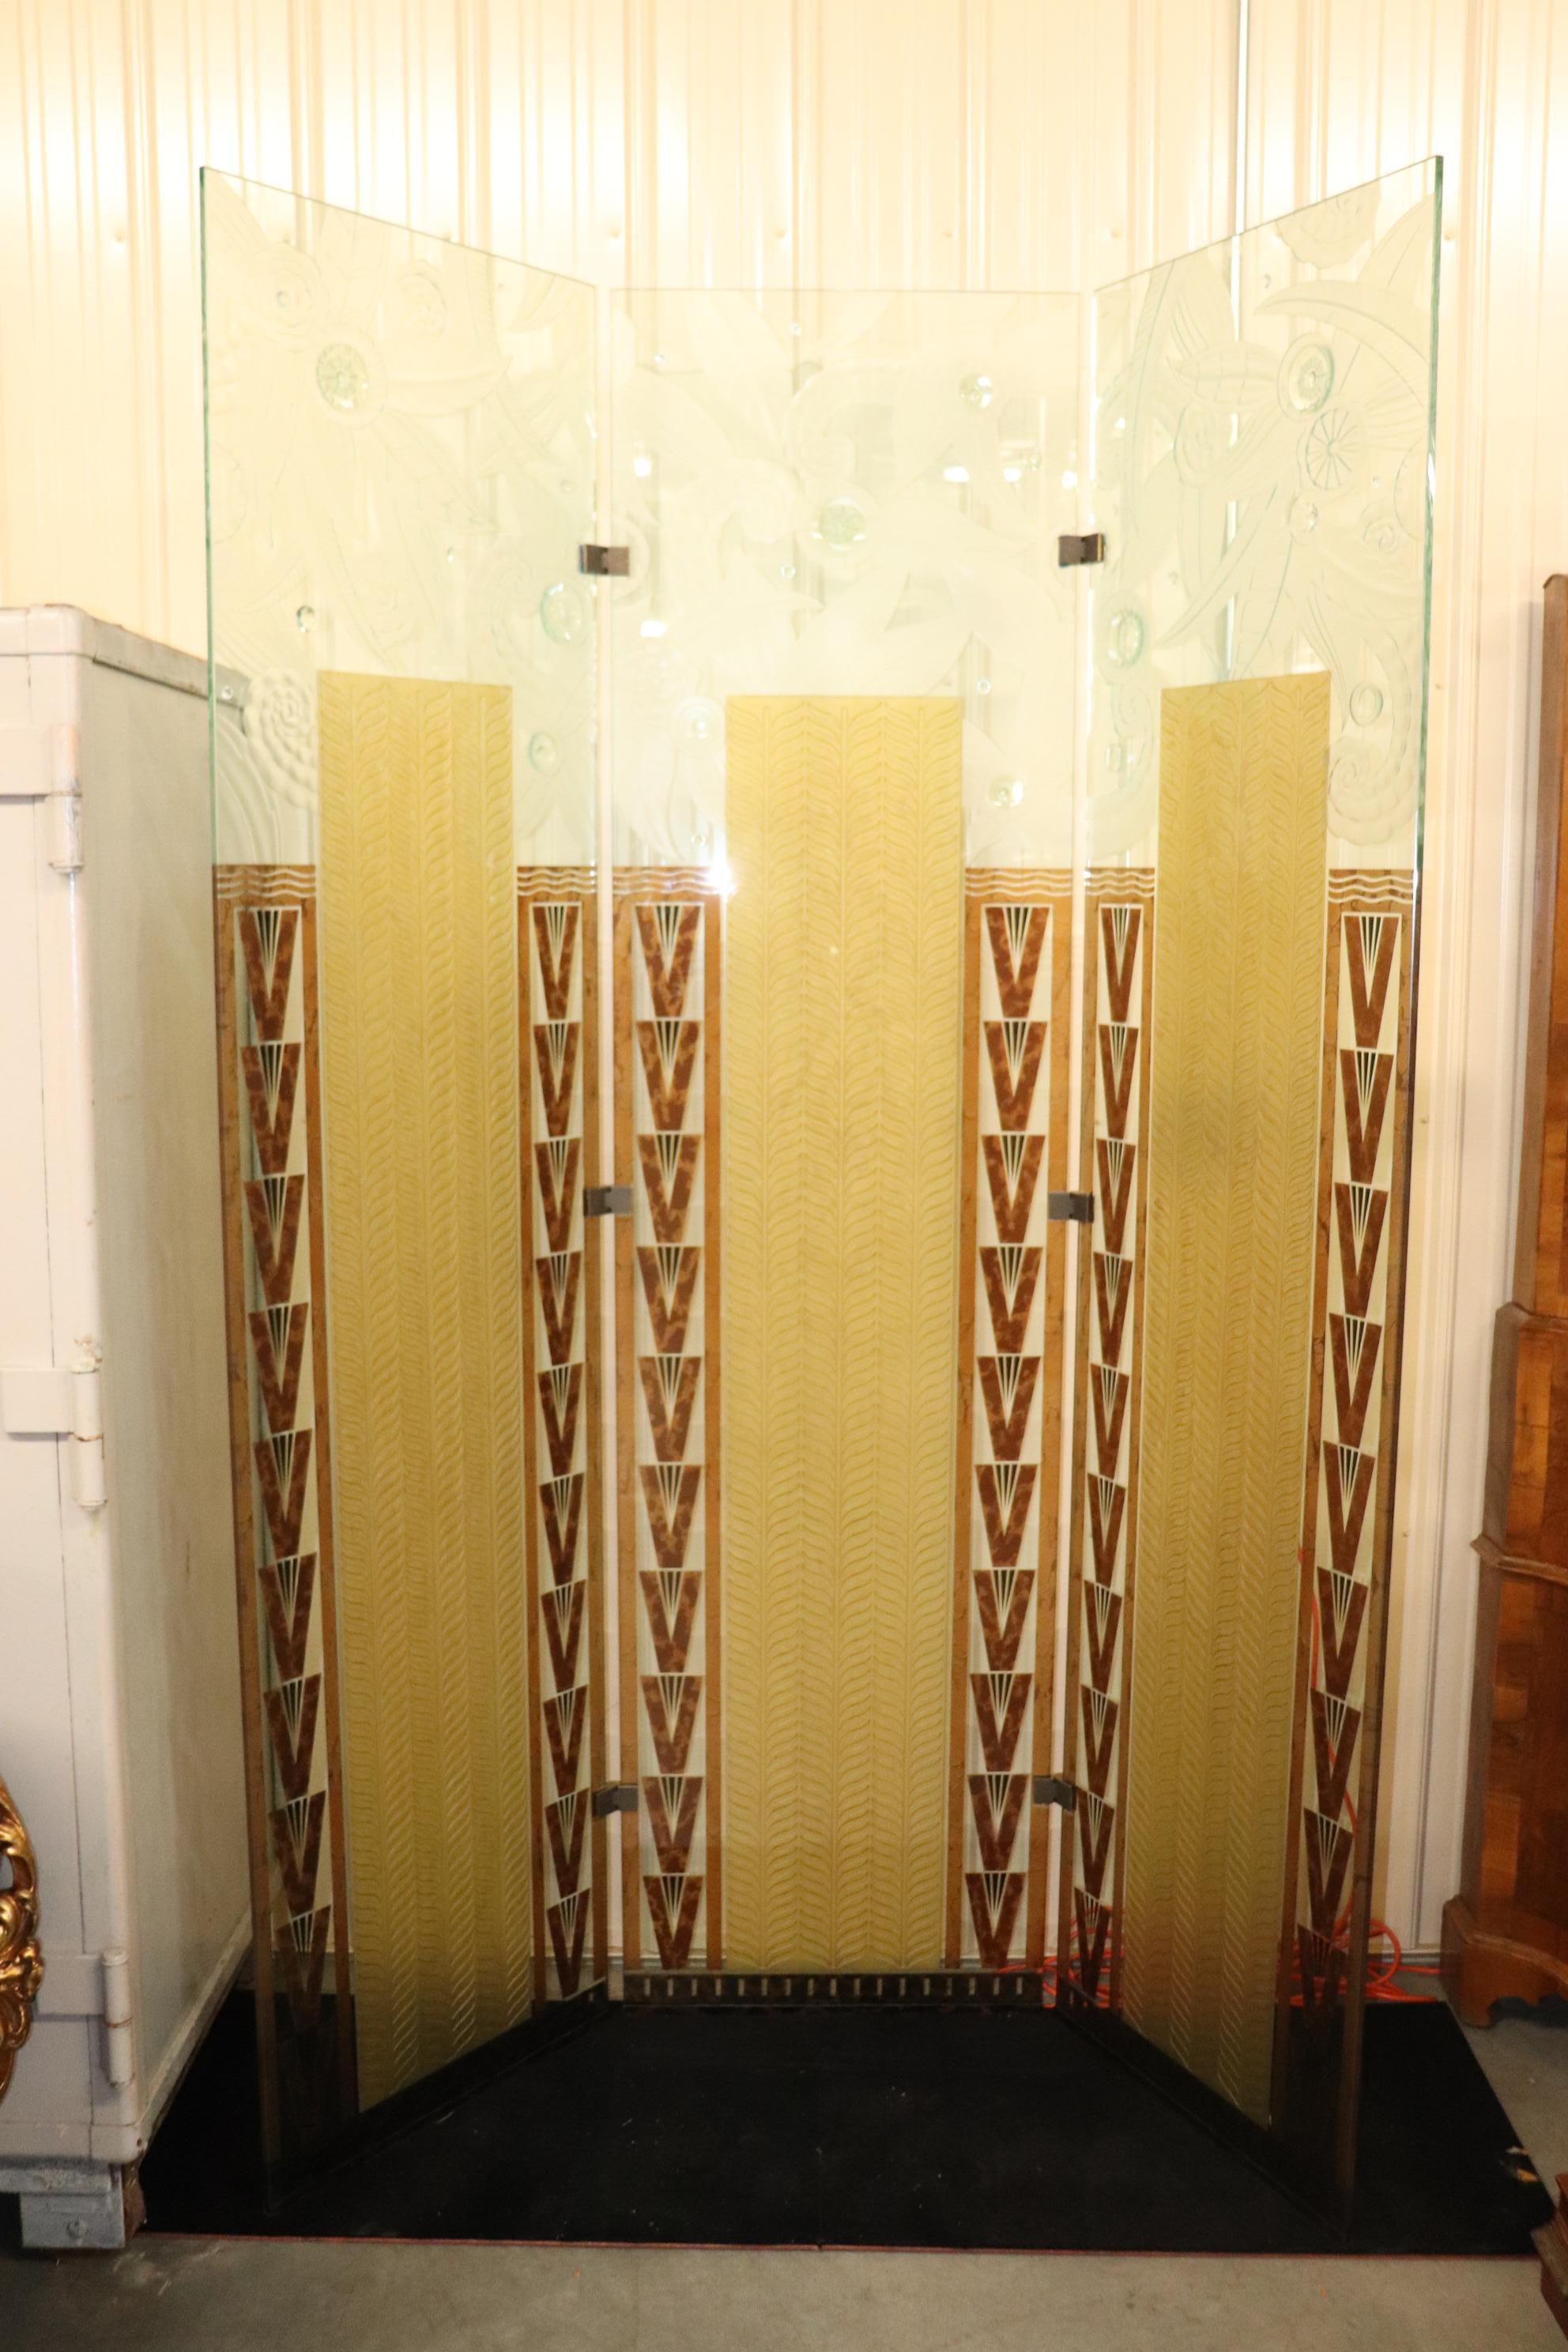 This is a superb skyscraper style French Art deco dressing screen. The screen is deeply etched in multiple depths and has a variety of themese ranging from waves to floral patterns and chevron shapes. The screen is in superb condition and seems to